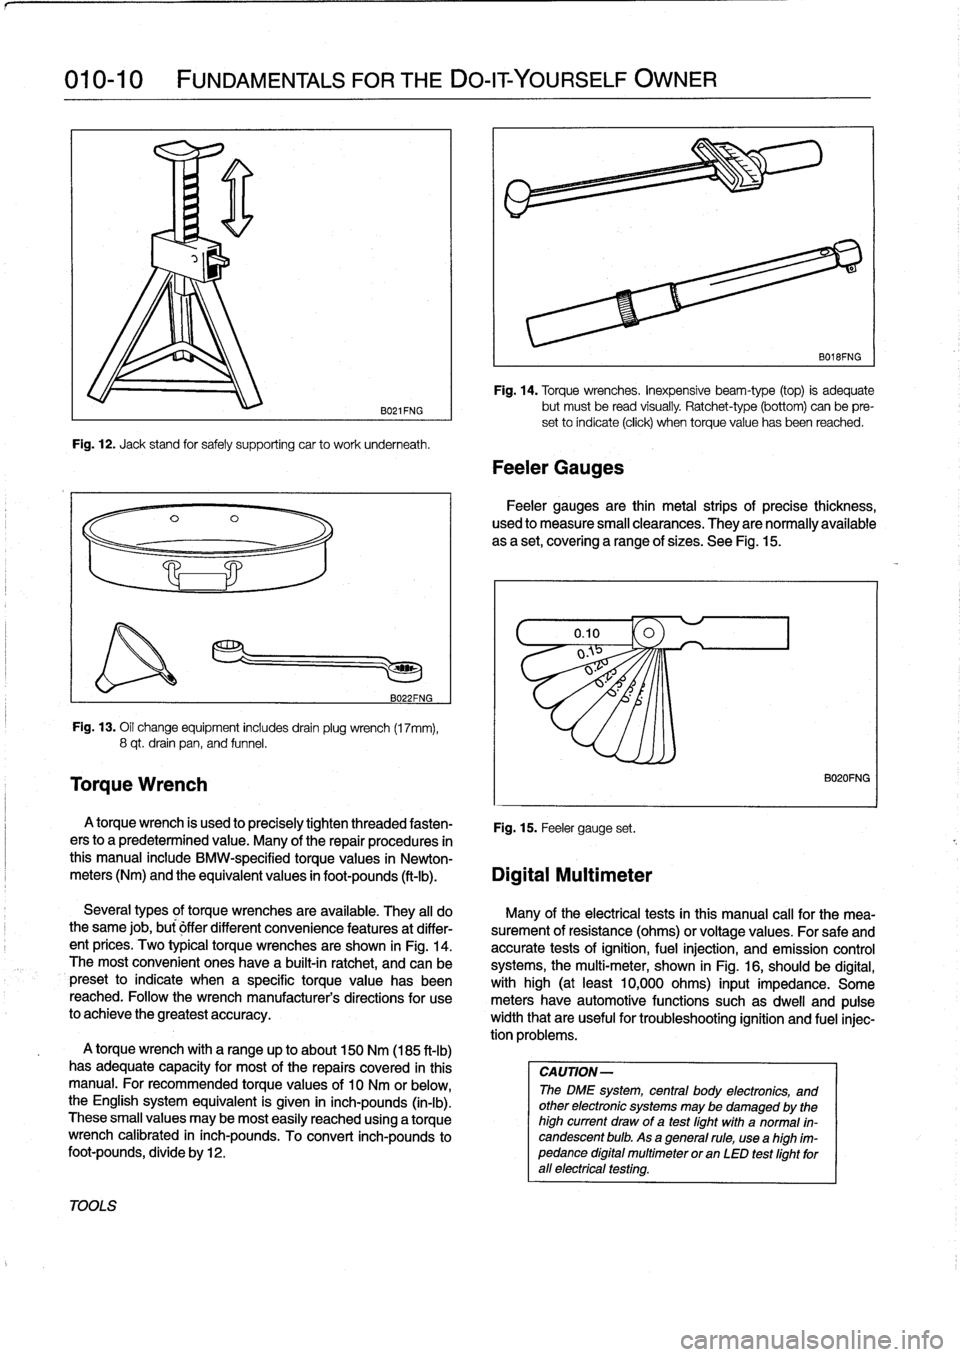 BMW 318i 1997 E36 Workshop Manual 
010-10

	

FUNDAMENTALS
FOR
THE
DO-IT
YOURSELF
OWNER

TOOLS

Torque
Wrench

B021FNG

Fig
.
12
.
Jack
stand
for
safely
supporting
car
to
work
underneath
.

B022FNG

Fig
.
13
.
Oil
change
equipment
inc